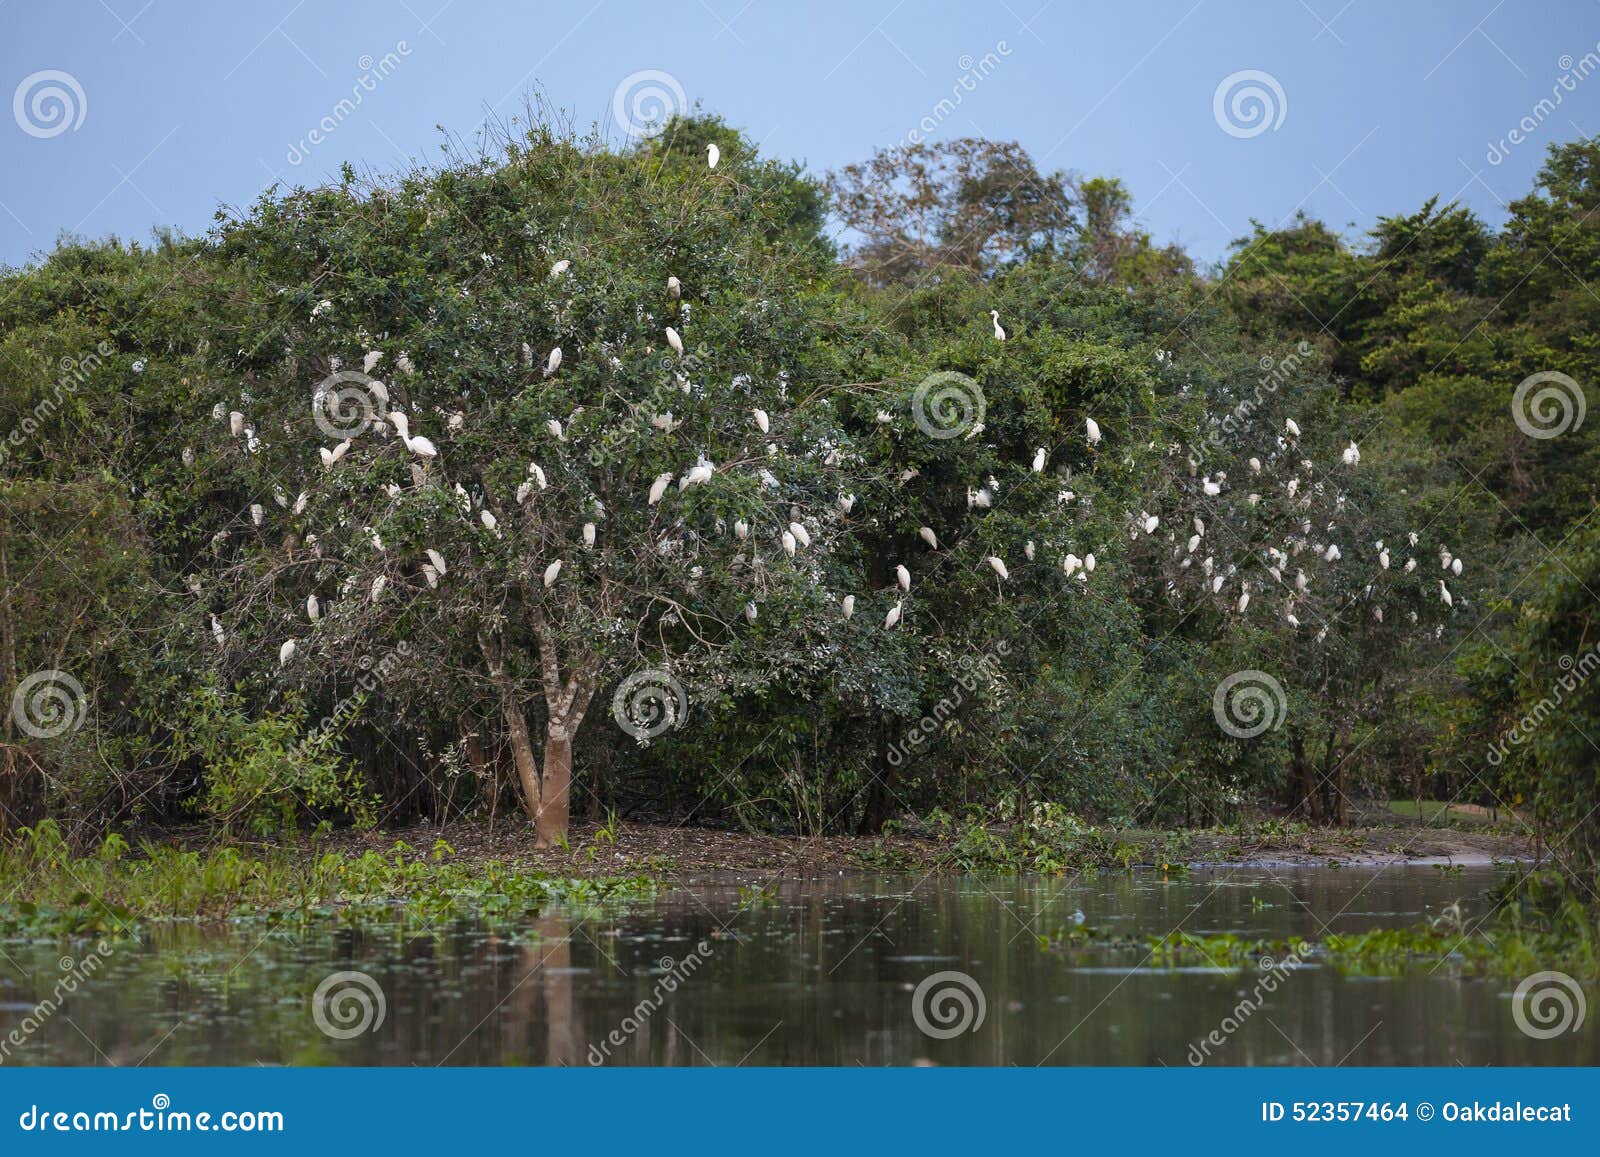 cattle egret roost along riverbank, wide angle